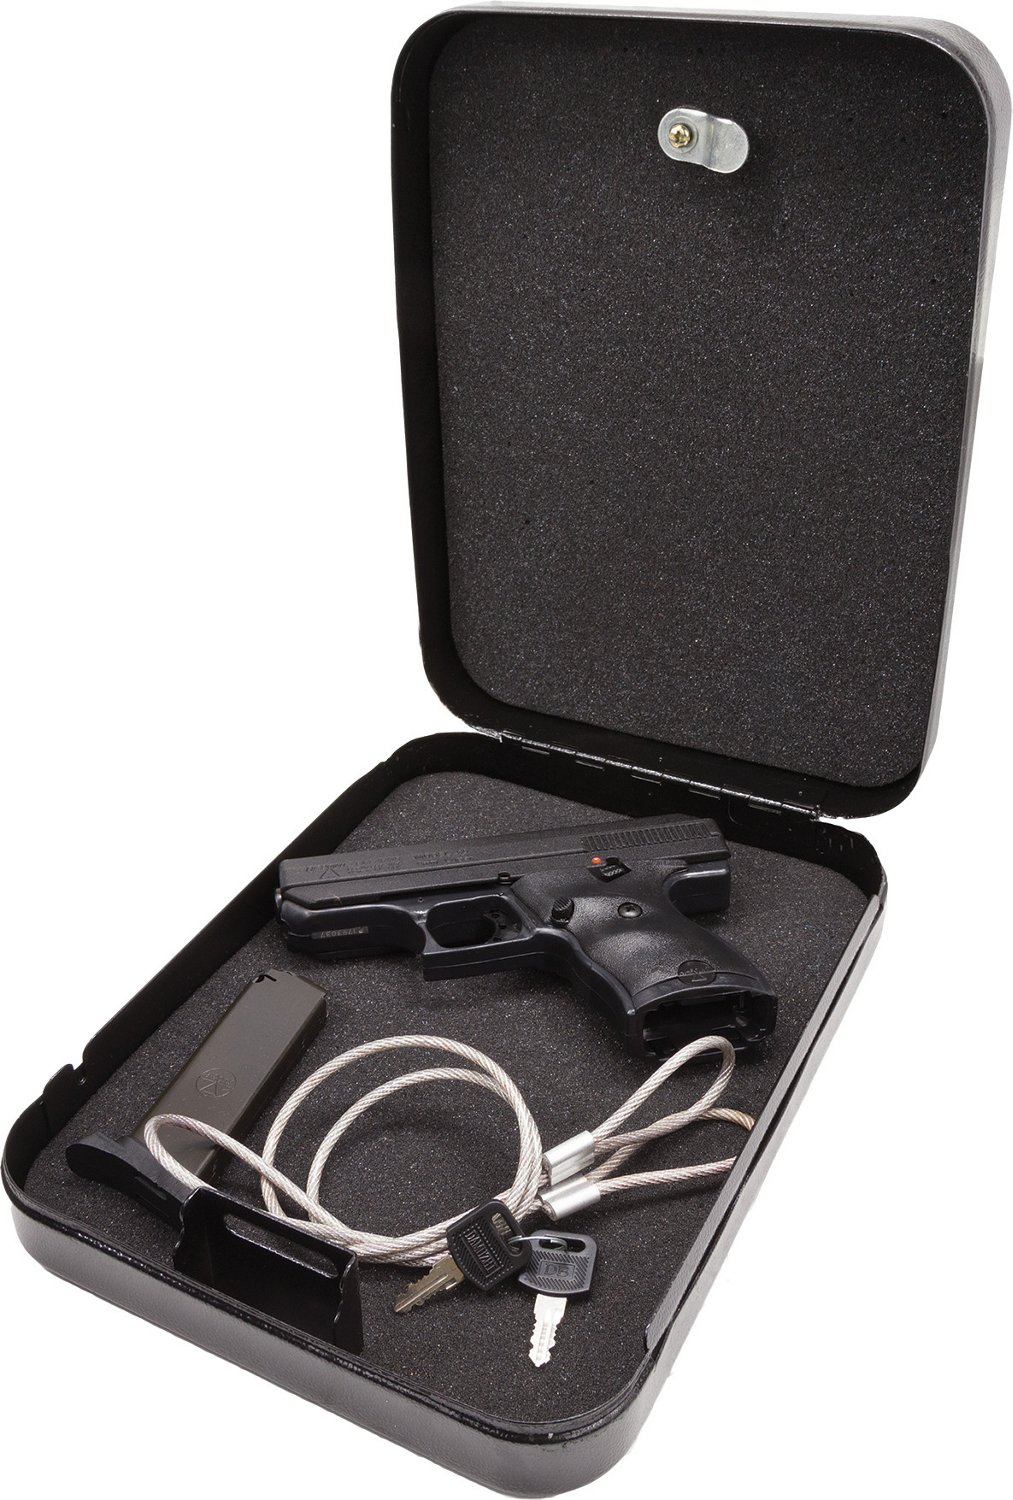 Hi-Point Firearms 9mm Luger Pistol Home Security Package                                                                         - view number 1 selected